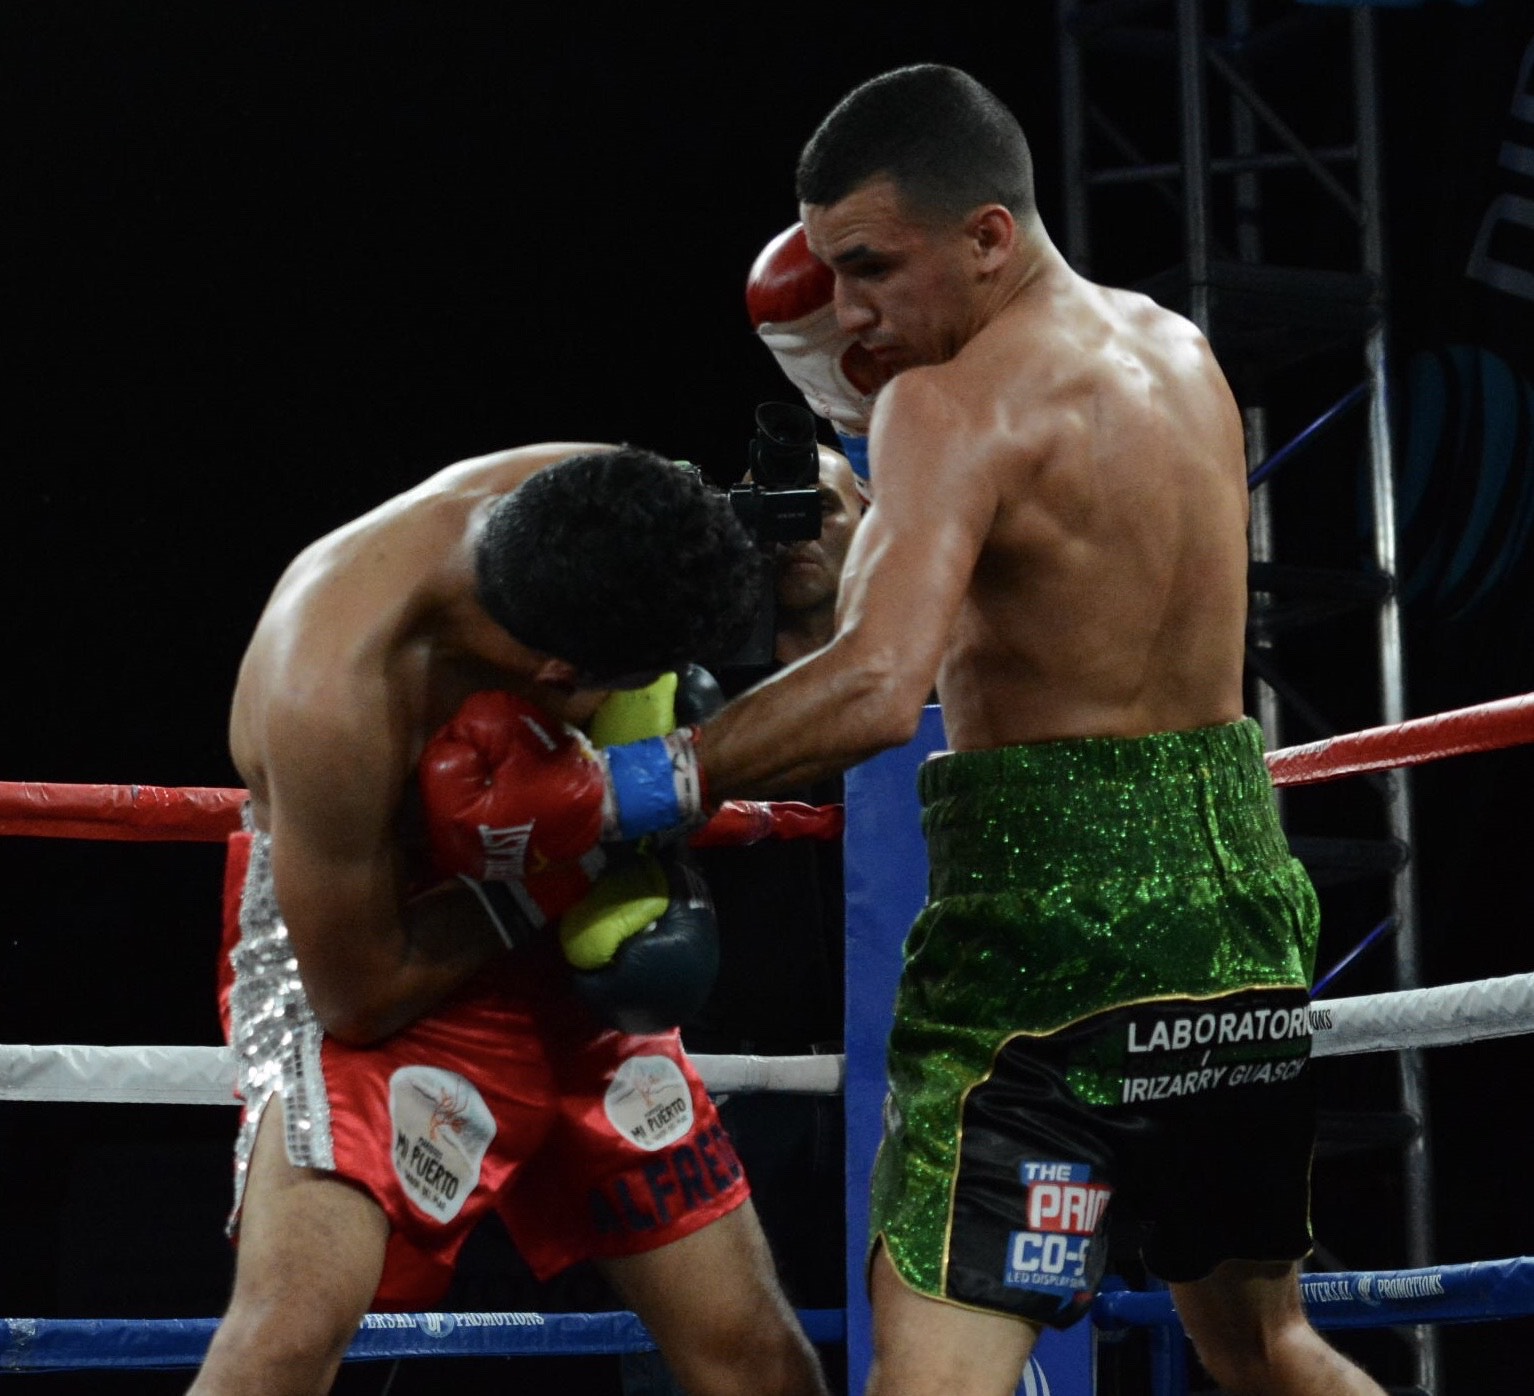 Fotos: Bryan Quiles/Universal Promotions